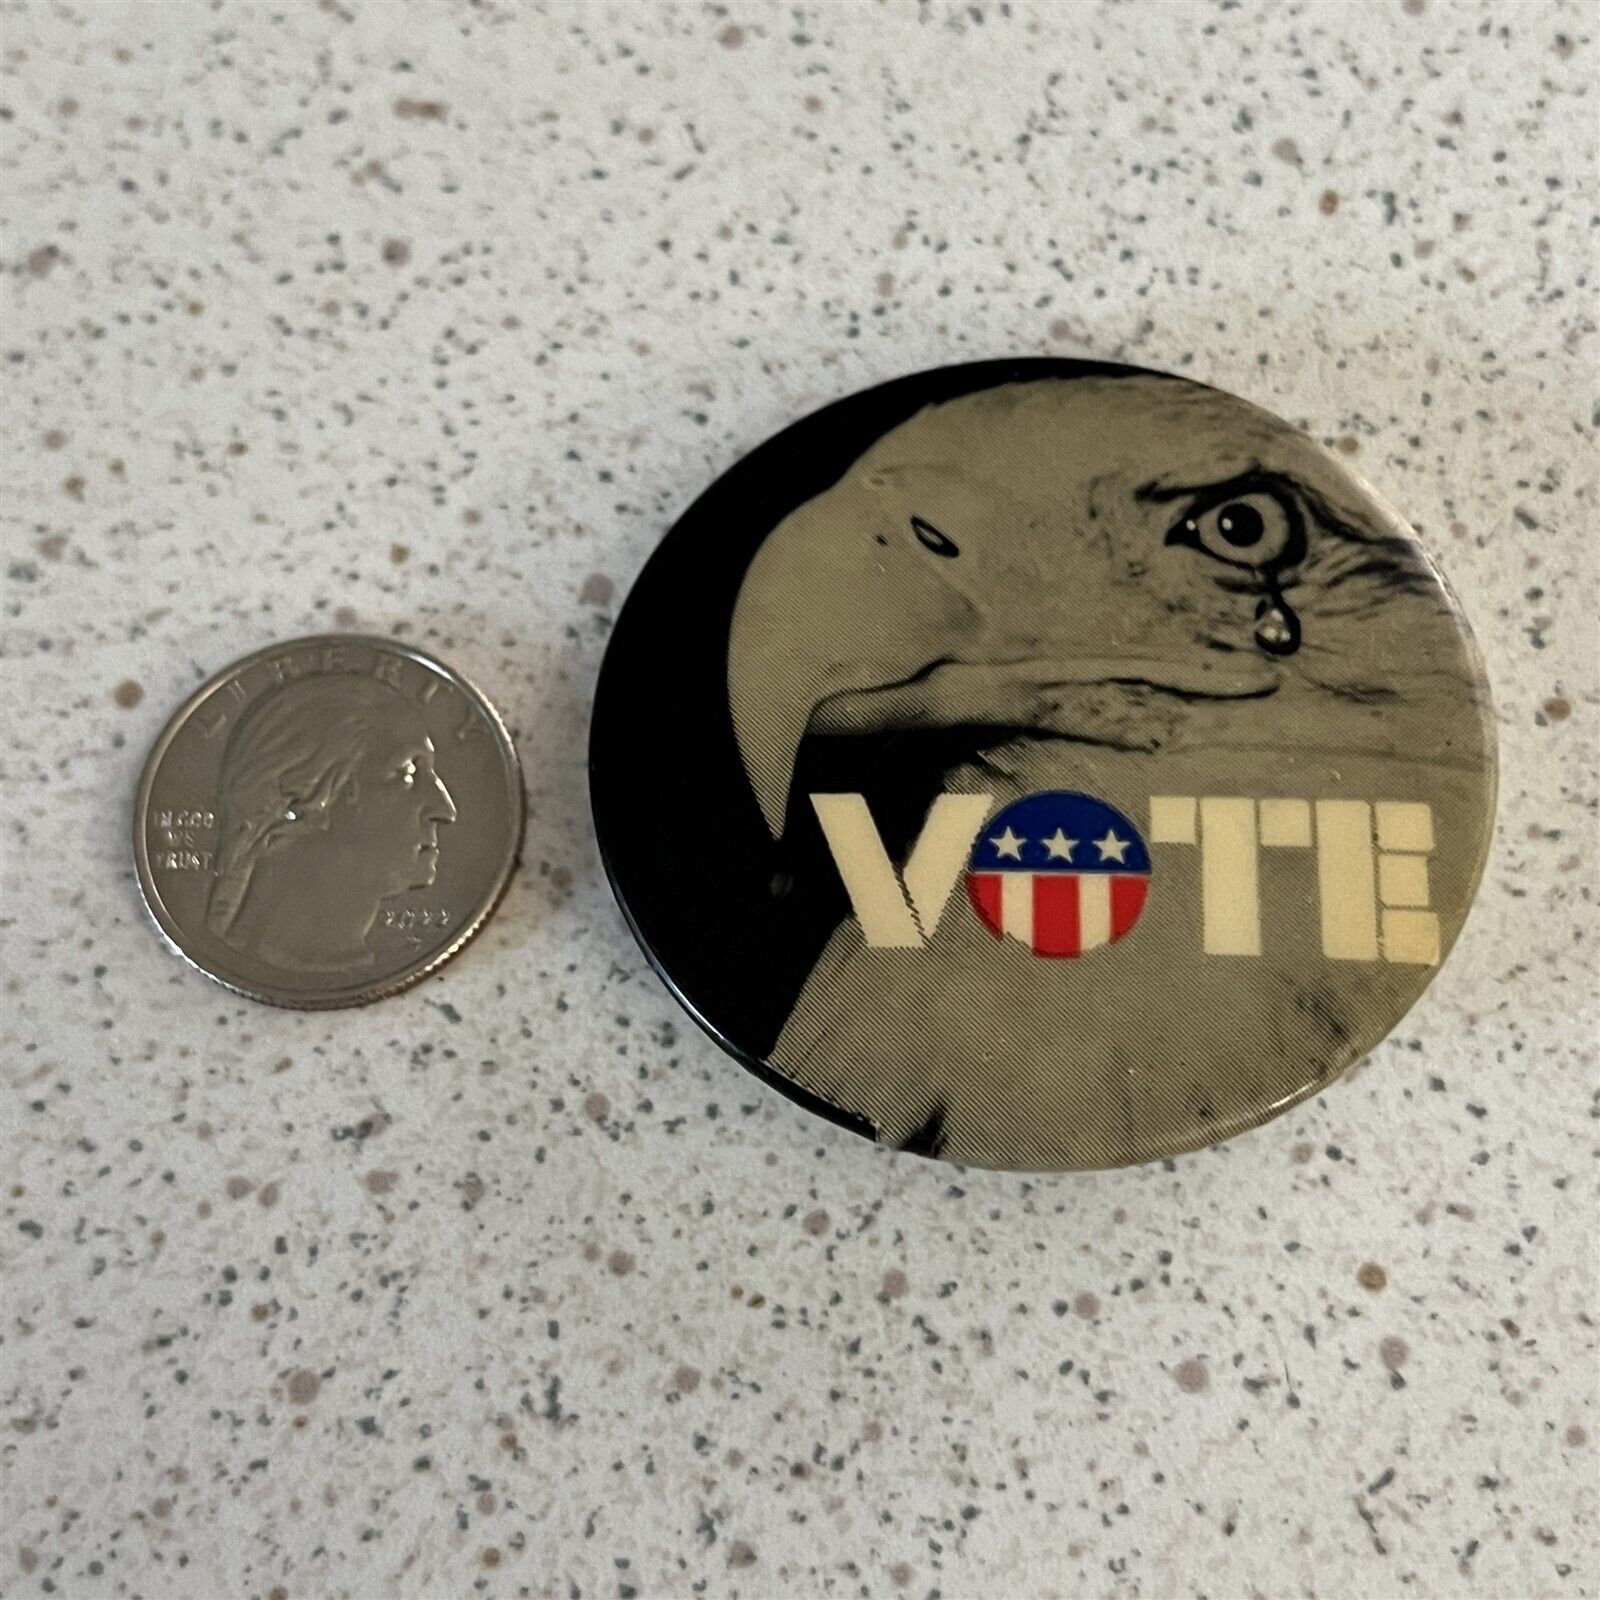 VOTE Vintage Crying Bald Eagle Political Pin Pinback Button #45064